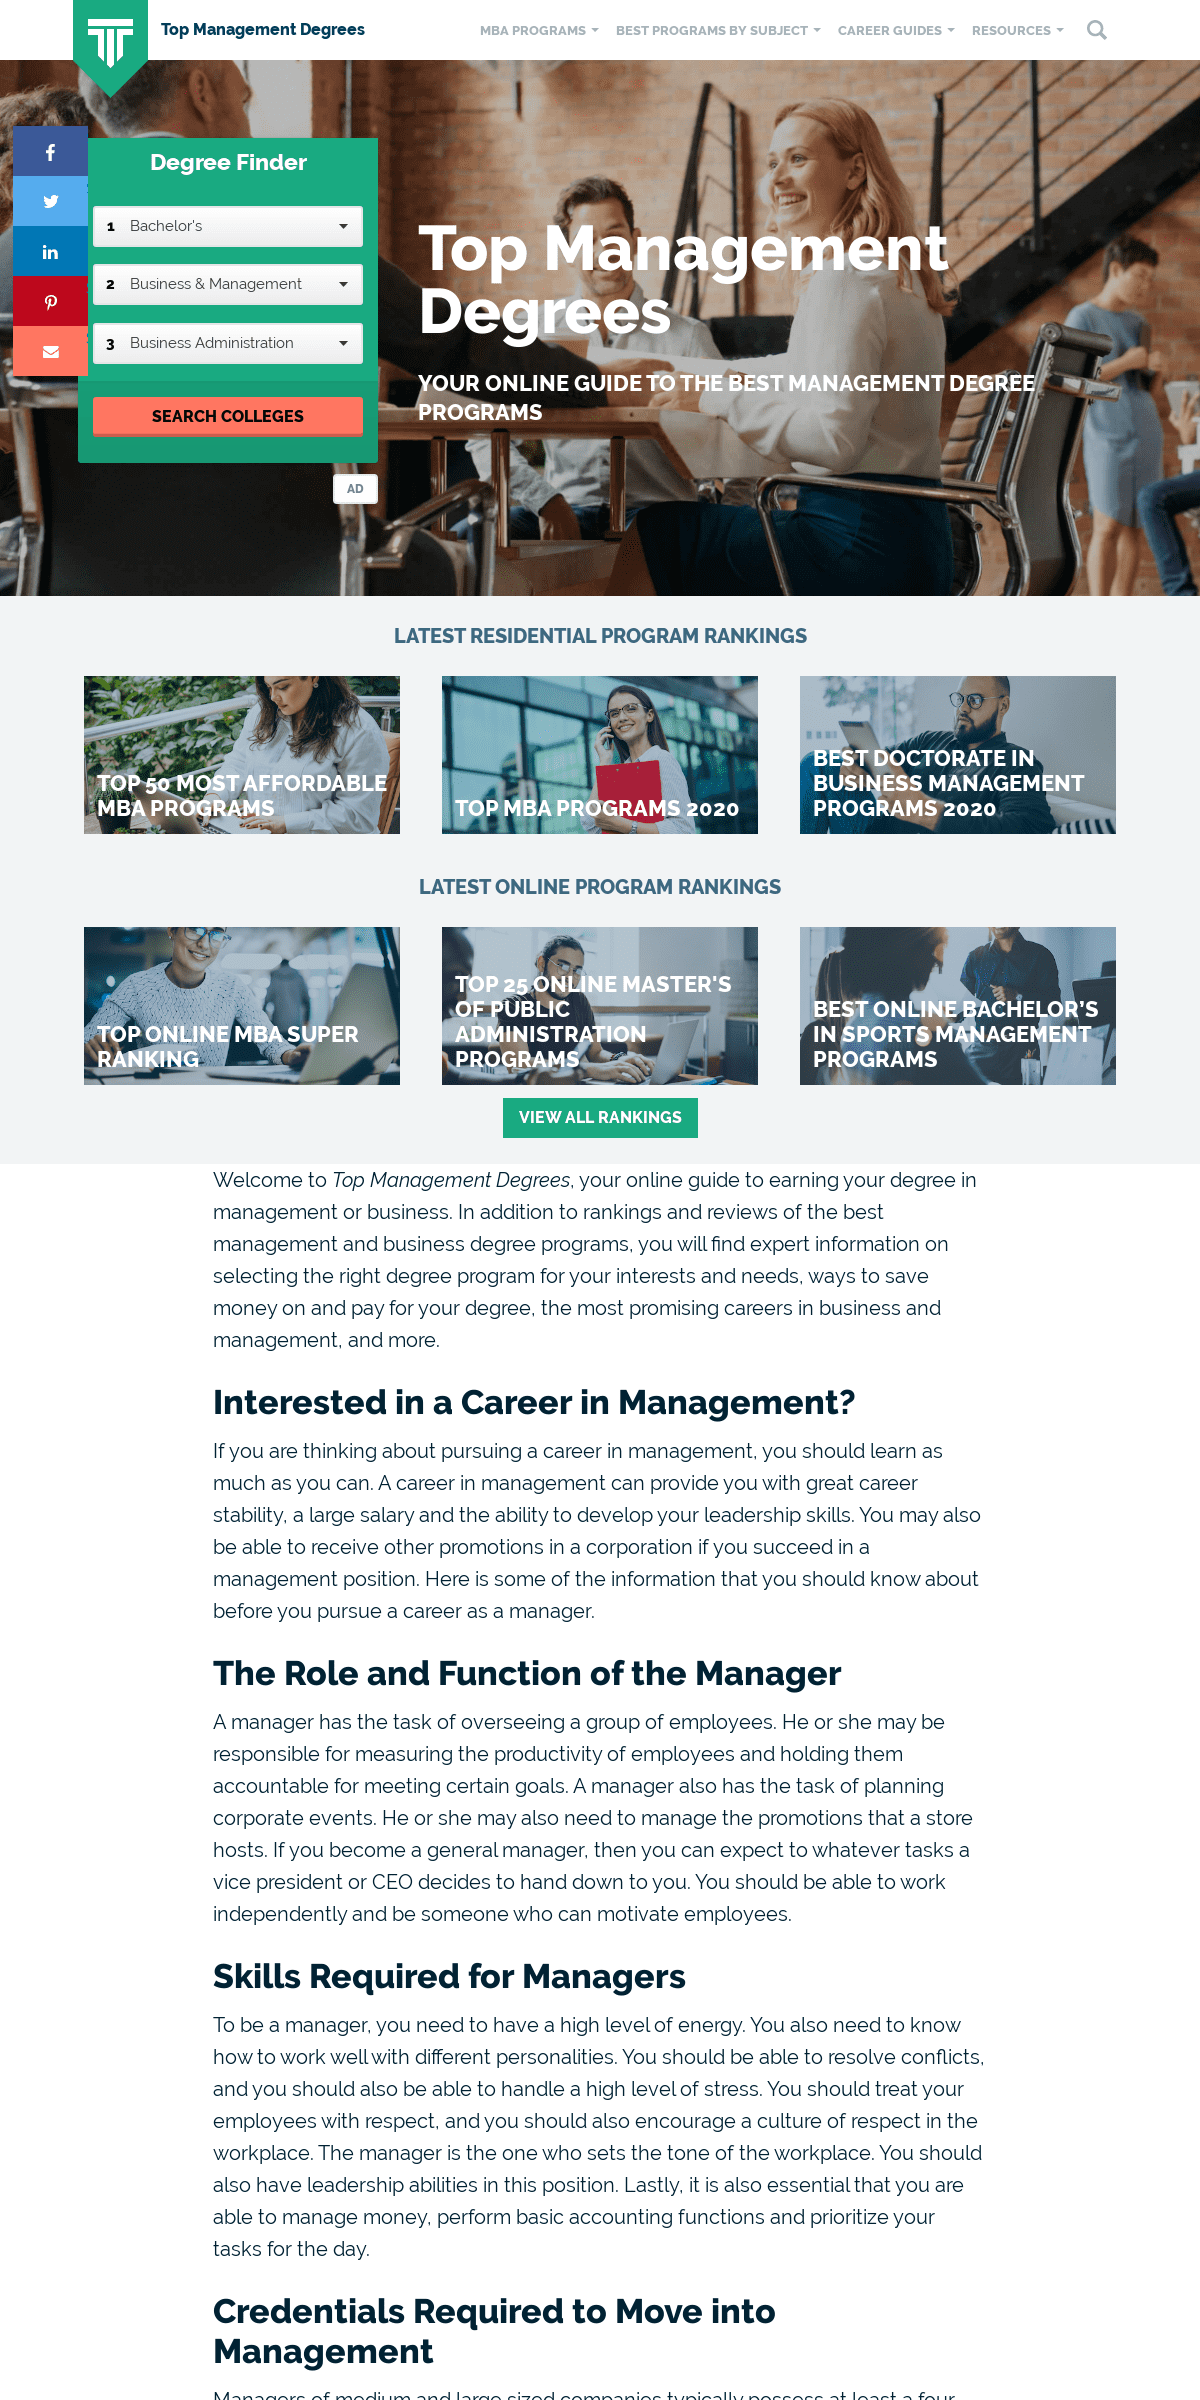 A complete backup of topmanagementdegrees.com